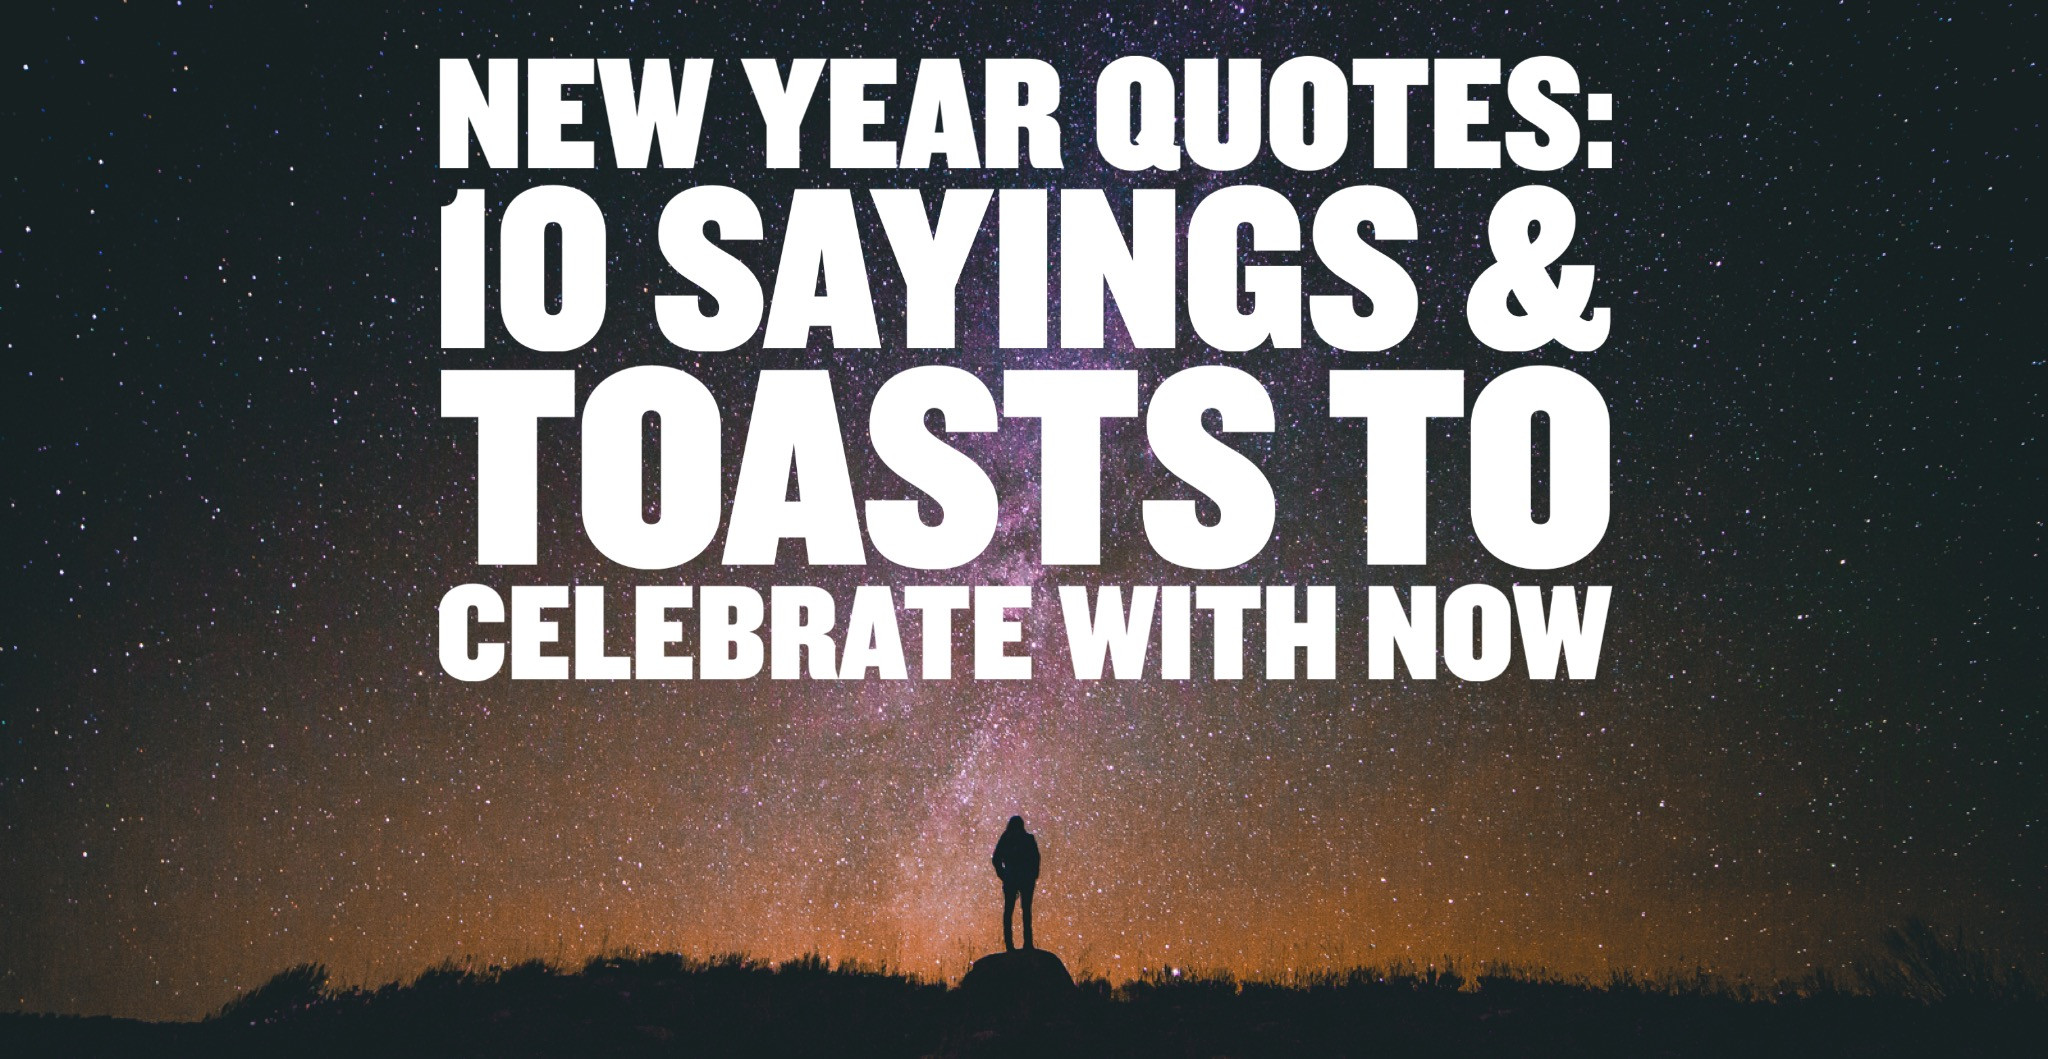 New Year Quote
 New Year Quotes 10 Sayings & Toasts To Celebrate With